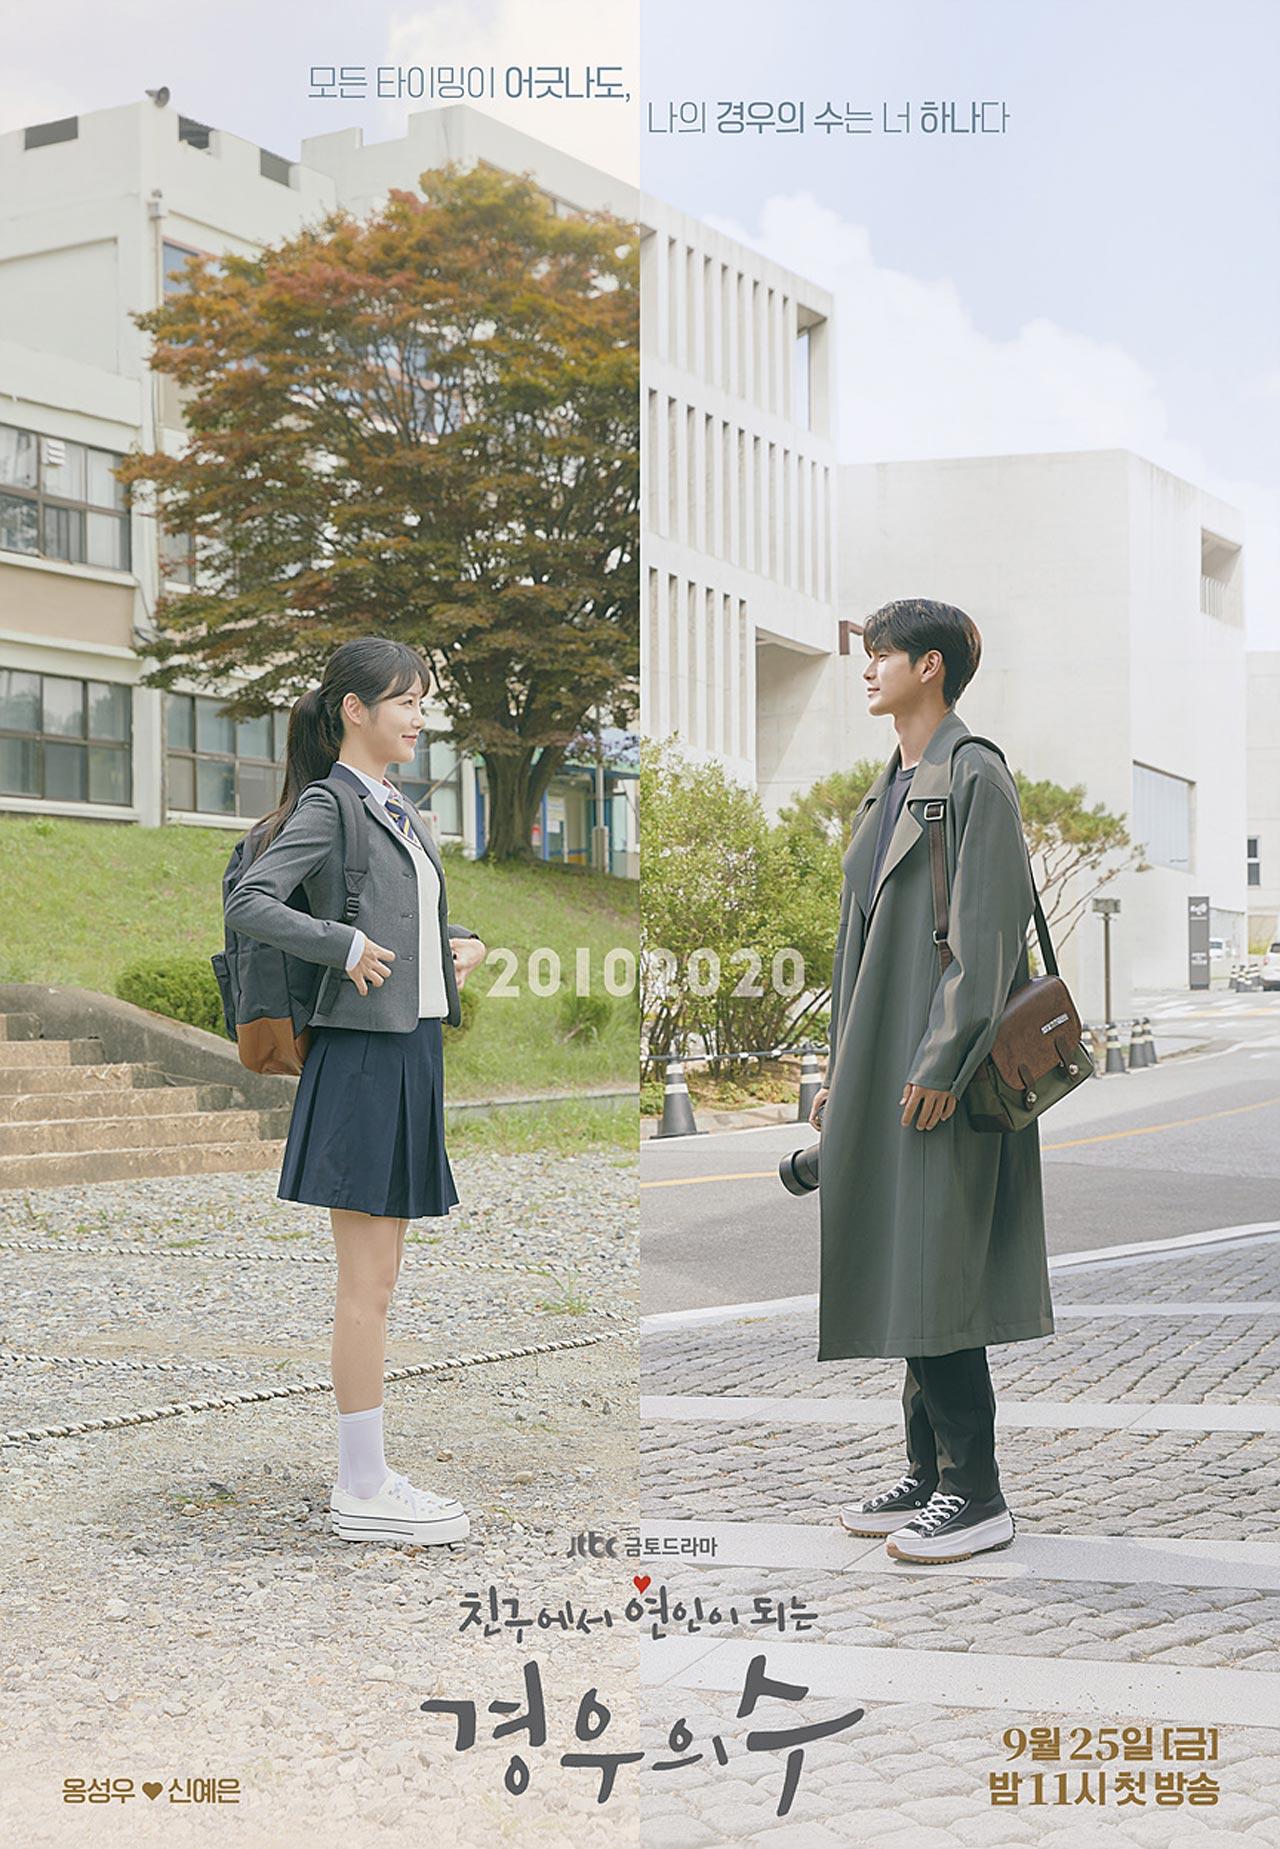 More Than Friends: Friends of ten years, Woo-yeon and Soo, secretly harbour feelings for each other. Will their love survive the misunderstandings and missed timings? 